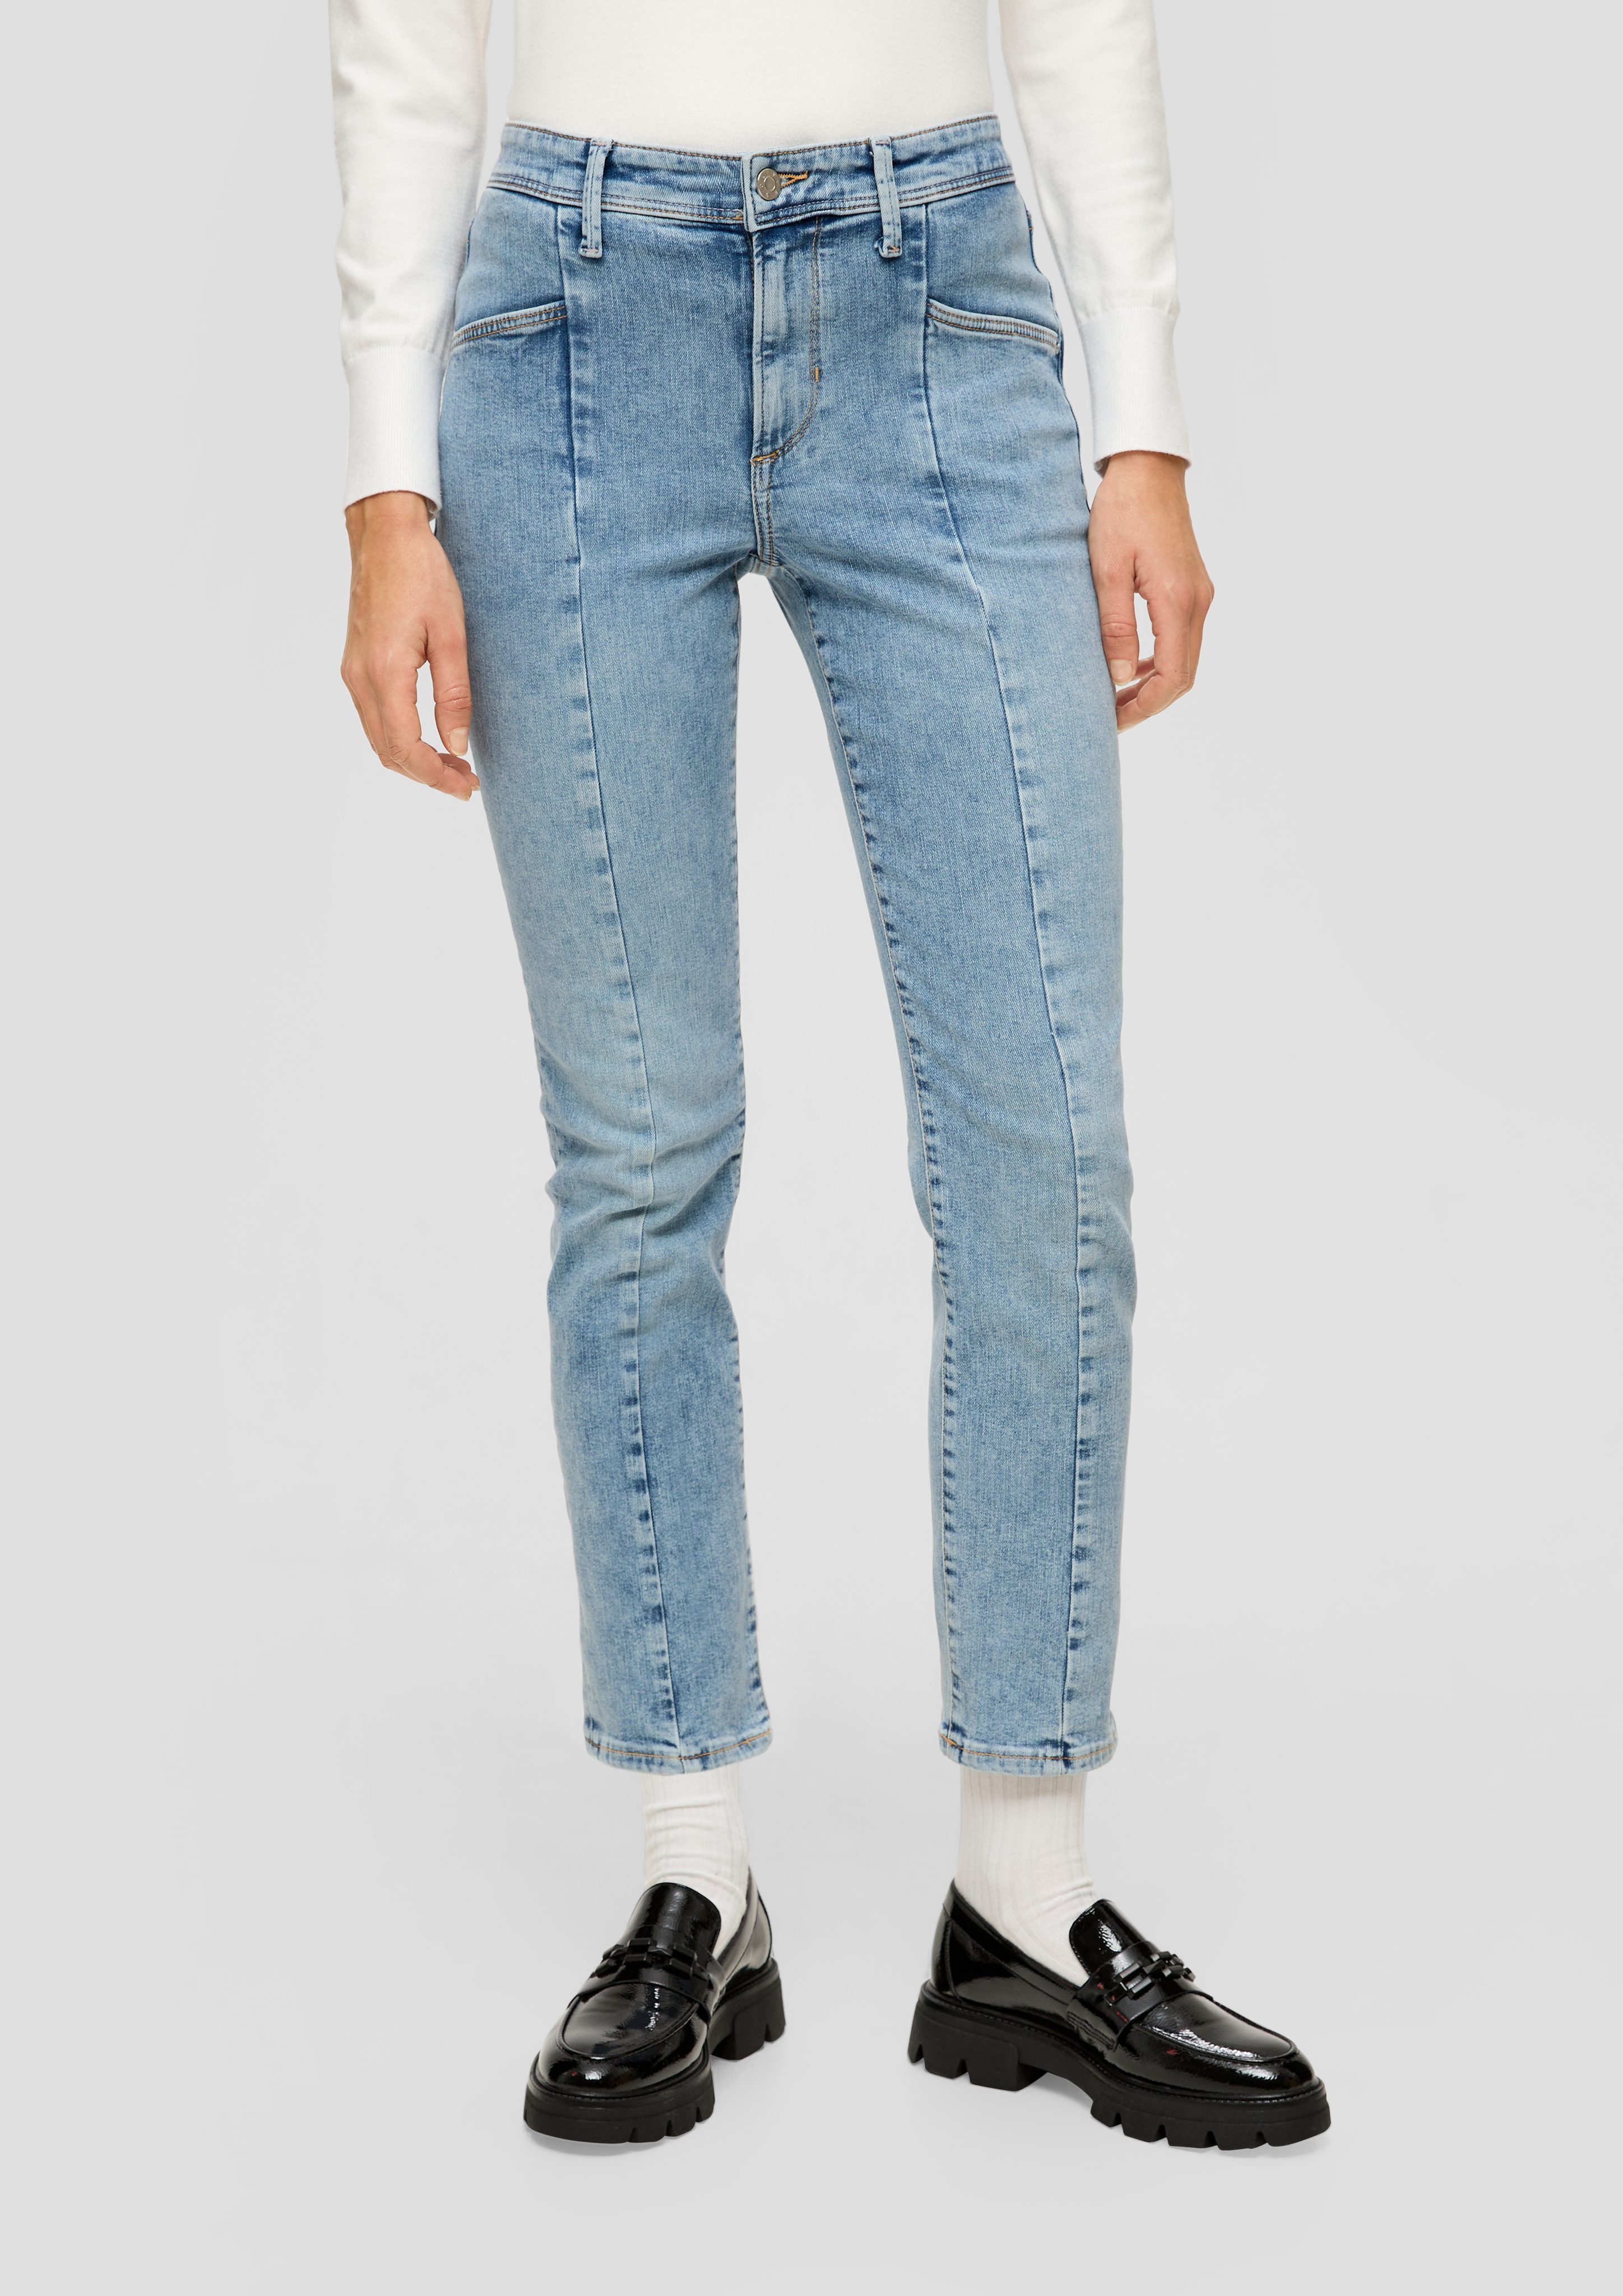 s.Oliver 7/8-Jeans Fit Slim Waschung, / Slim Mid Jeans / Ankle Rise Leg / Label-Patch, Teilungsnähte